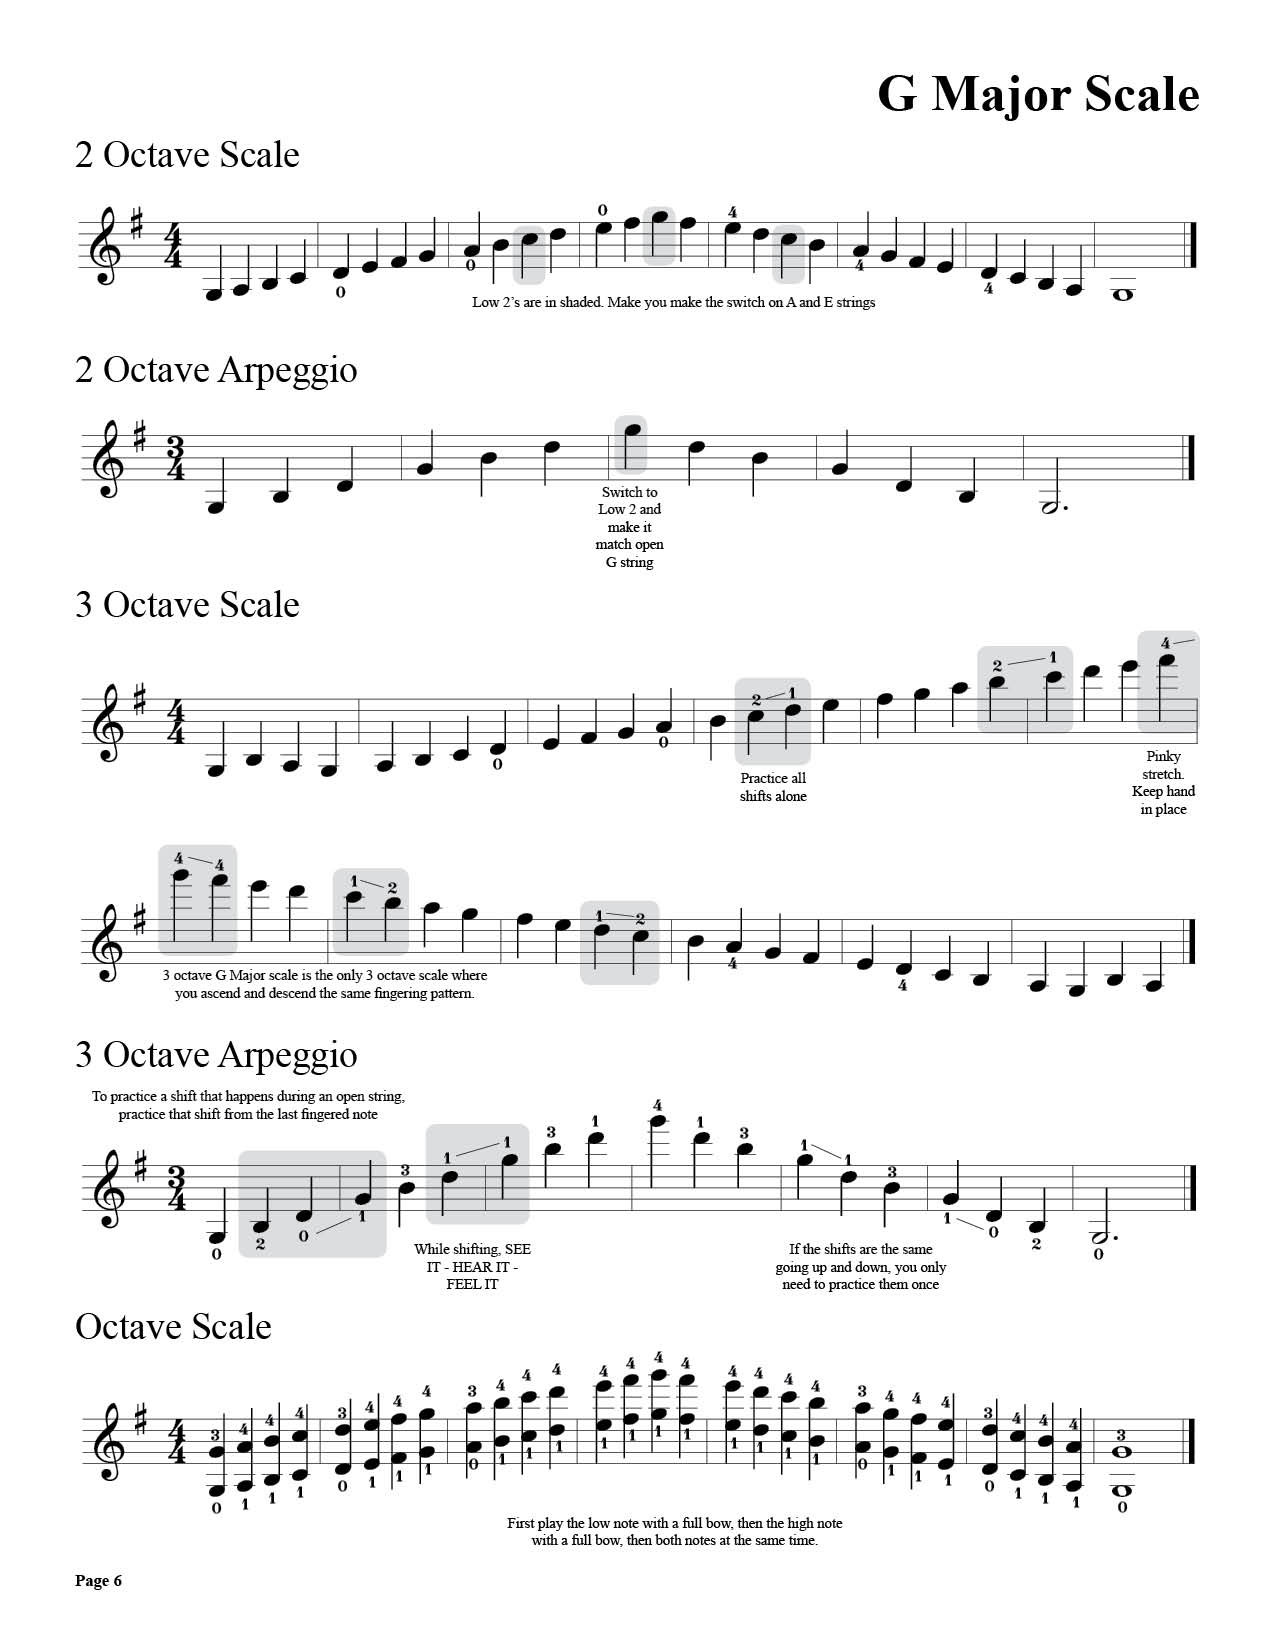 Sample of G Major Scale Arpeggio and Octave Scale